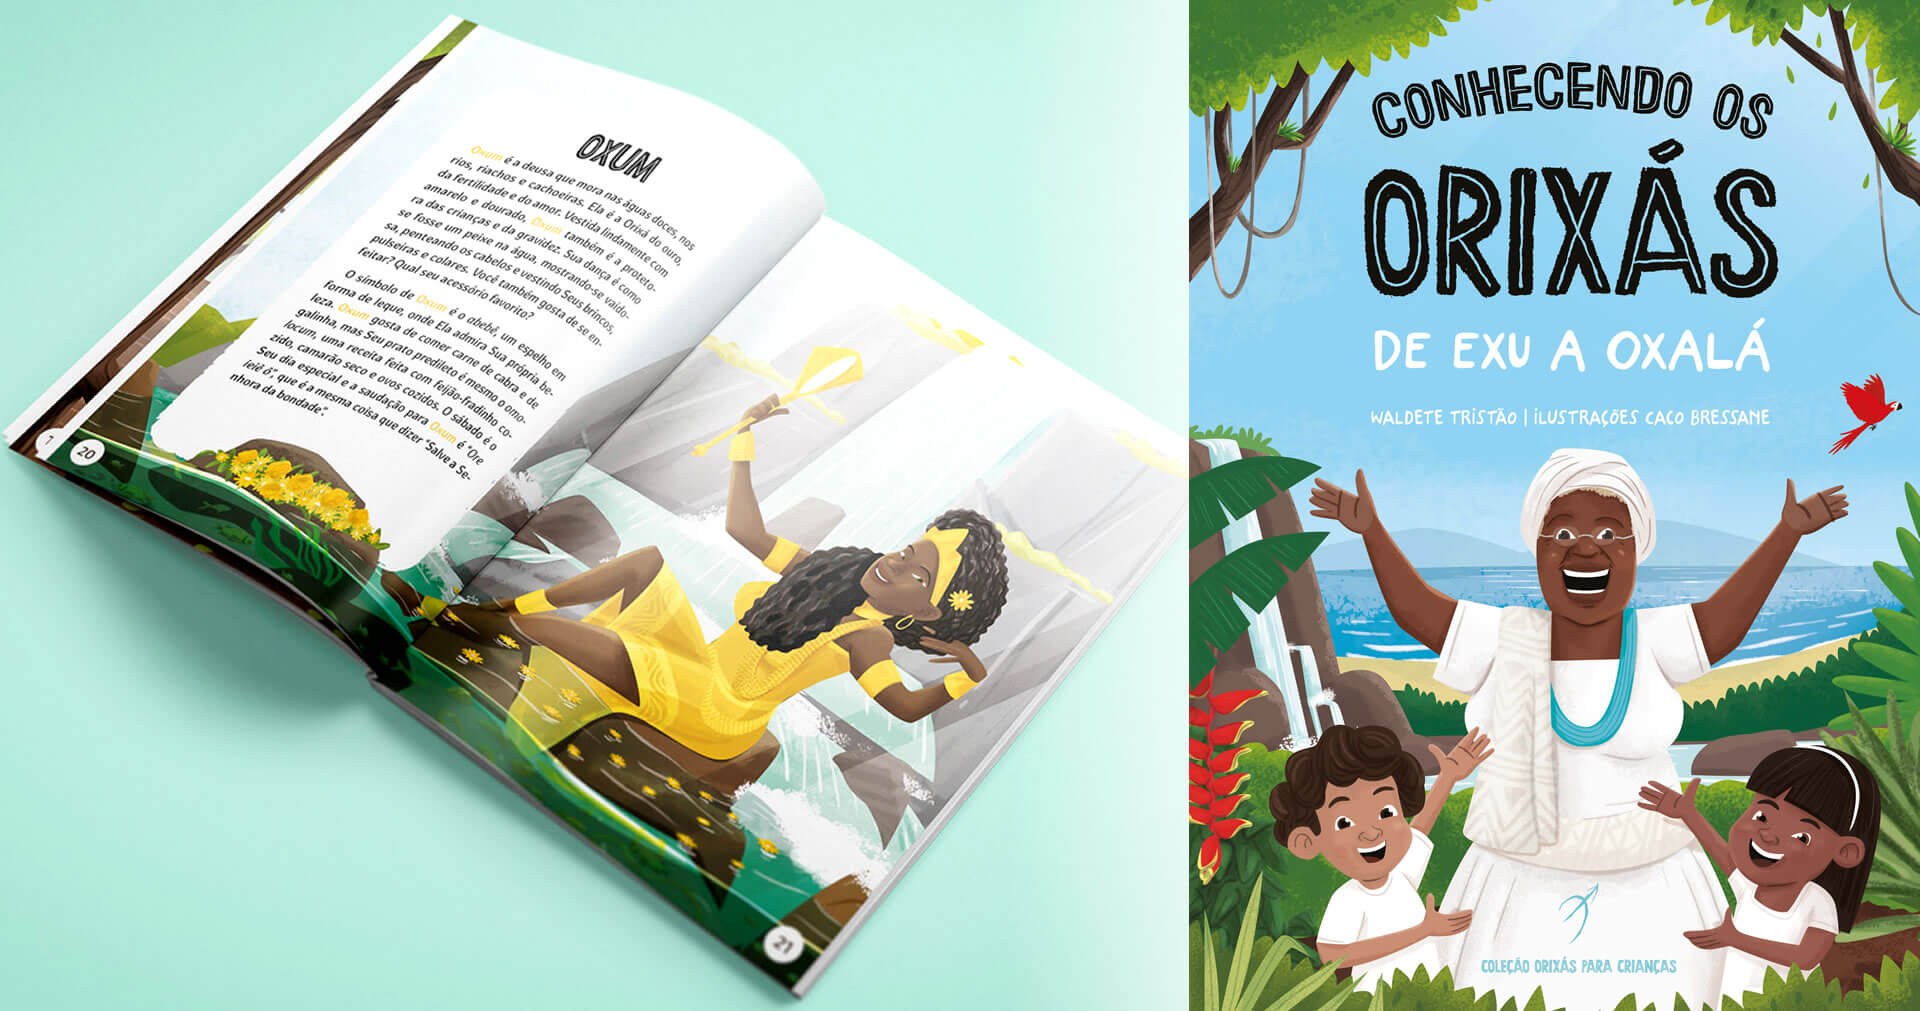 Orixás Para Crianças | Written by Waldete Tristão, Knowing the Orixás is a glorious book intended to educate young people about the beauty of African spirituality.